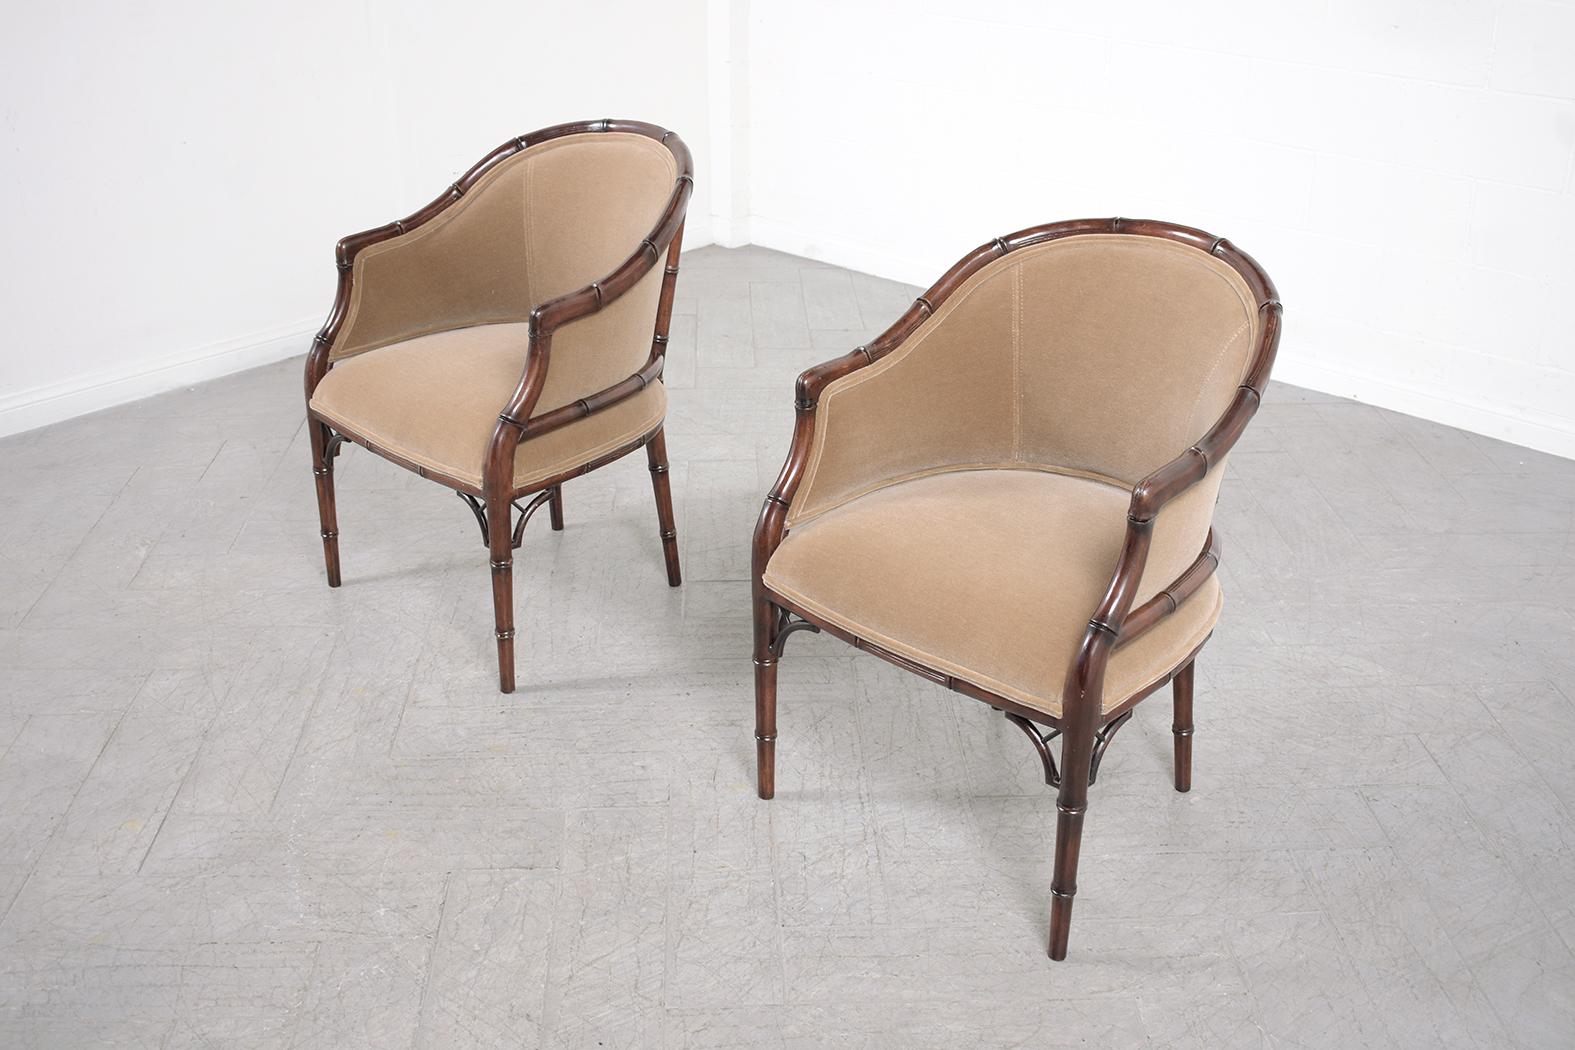 Elegant Vintage Hollywood Regency Armchairs: Bamboo-Carved and Newly Refurbished In Good Condition For Sale In Los Angeles, CA